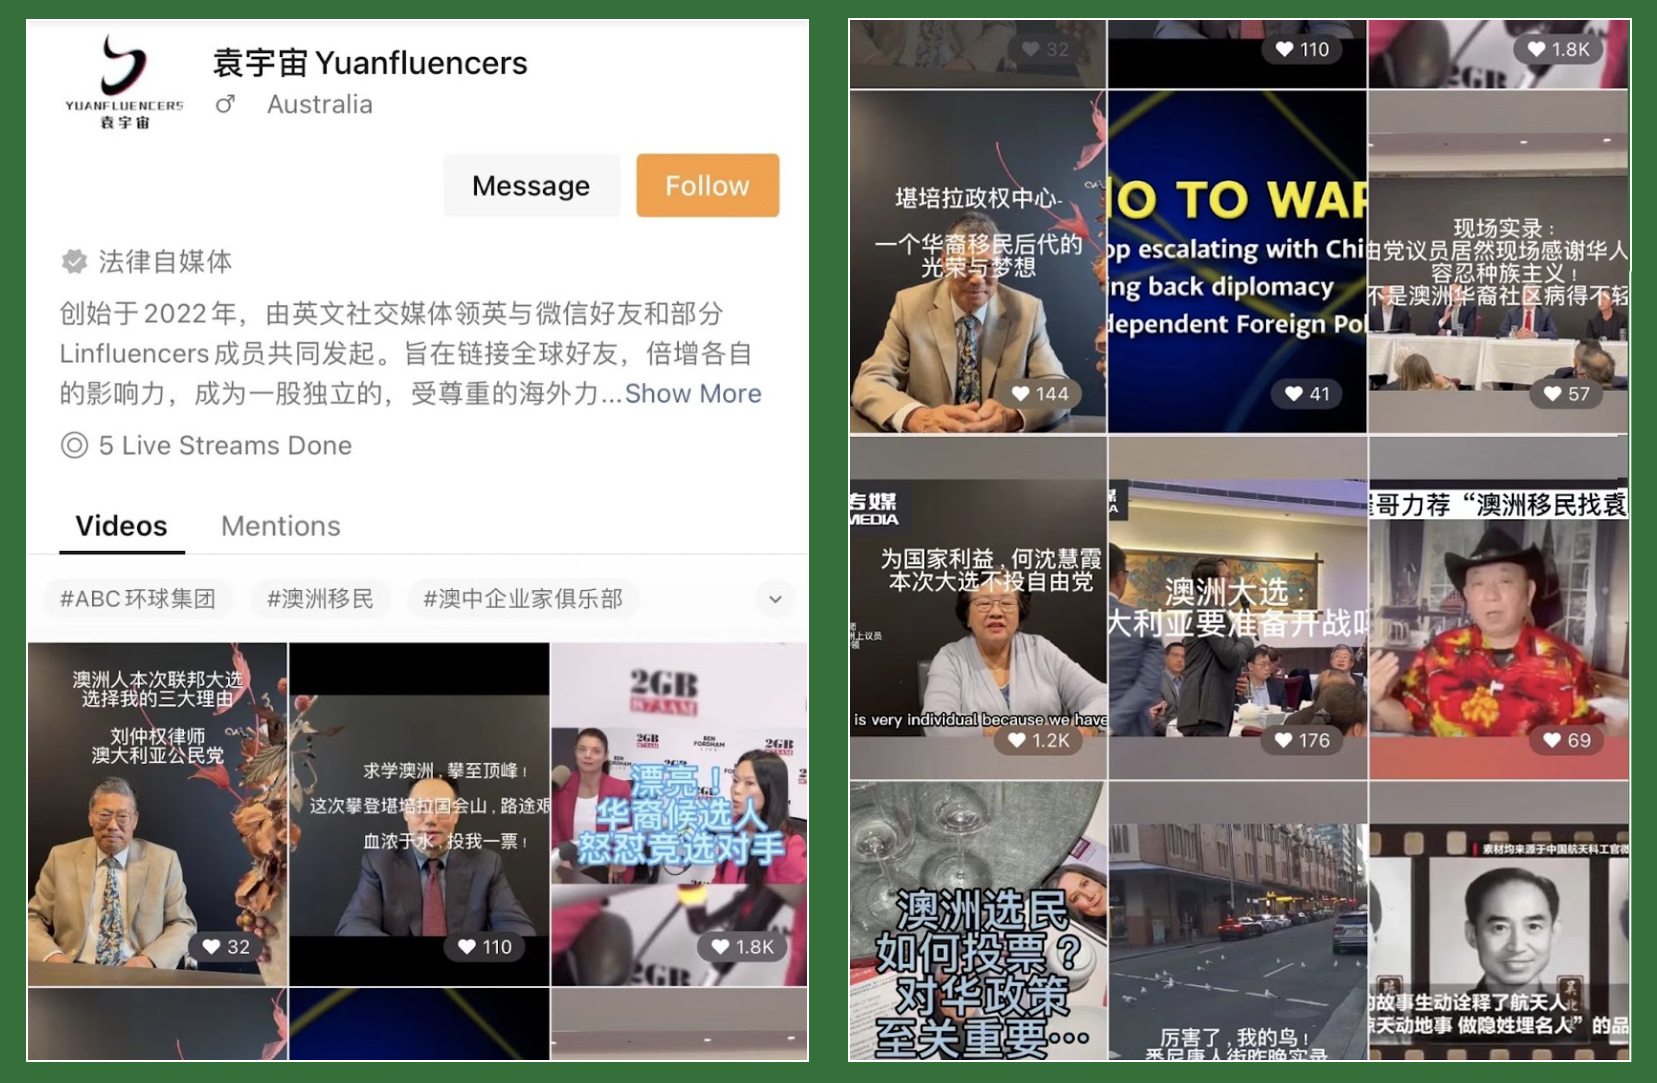 Screenschots of the WeChat account, showing a number of thumbnail images.